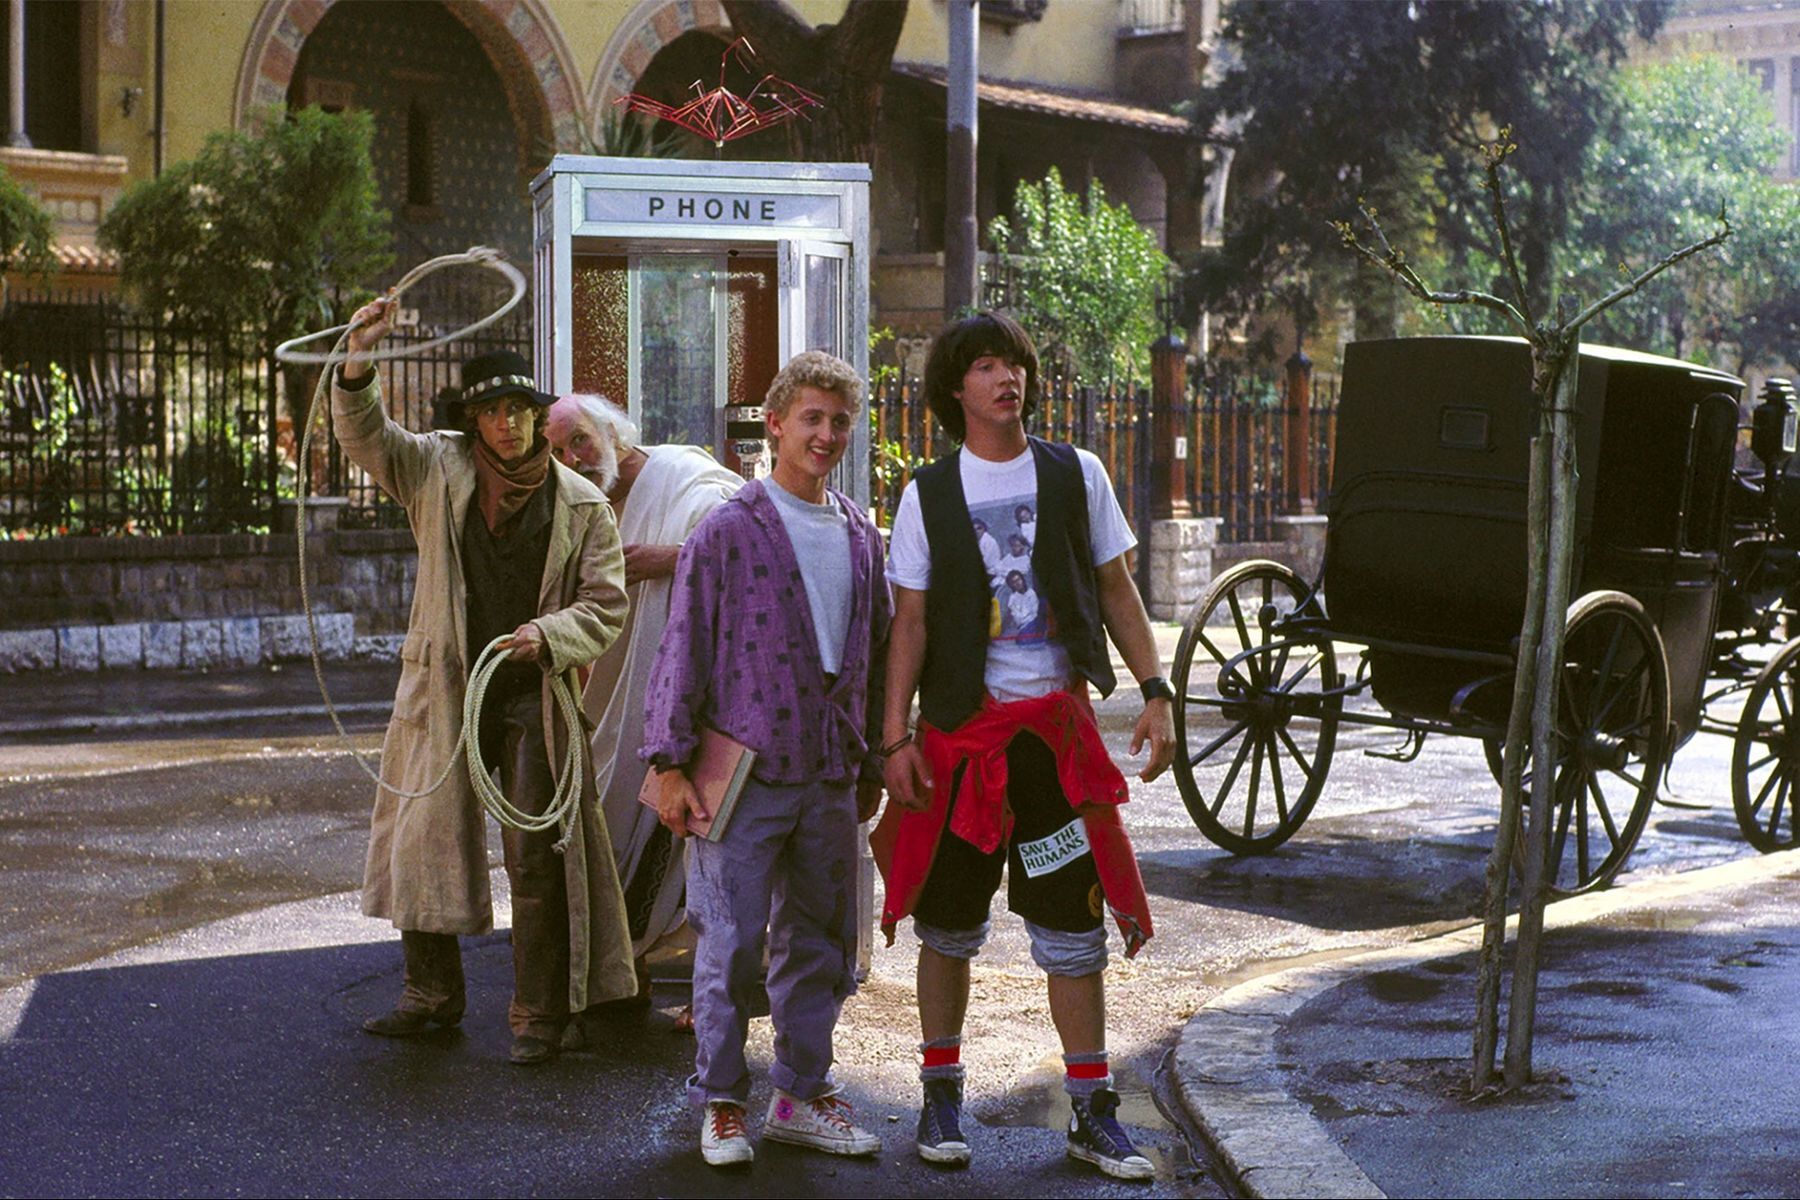 <p>Featuring a young Keanu Reeves and Alex Winter, this first instalment of the buddy-comedy <em>Bill & Ted</em> franchise continues to be well loved. A time traveller from the future journeys to 1988 to ensure that Bill and Ted, two dim-witted high school students, pass their history class and change the world with their music. Goofy and charming, the original <em>Bill & Ted</em> film became <a href="https://www.denofgeek.com/movies/bill-and-teds-excellent-pop-culture-adventures/">a pop culture sensation</a>, inspiring everything from an animated TV show to breakfast cereal!</p>